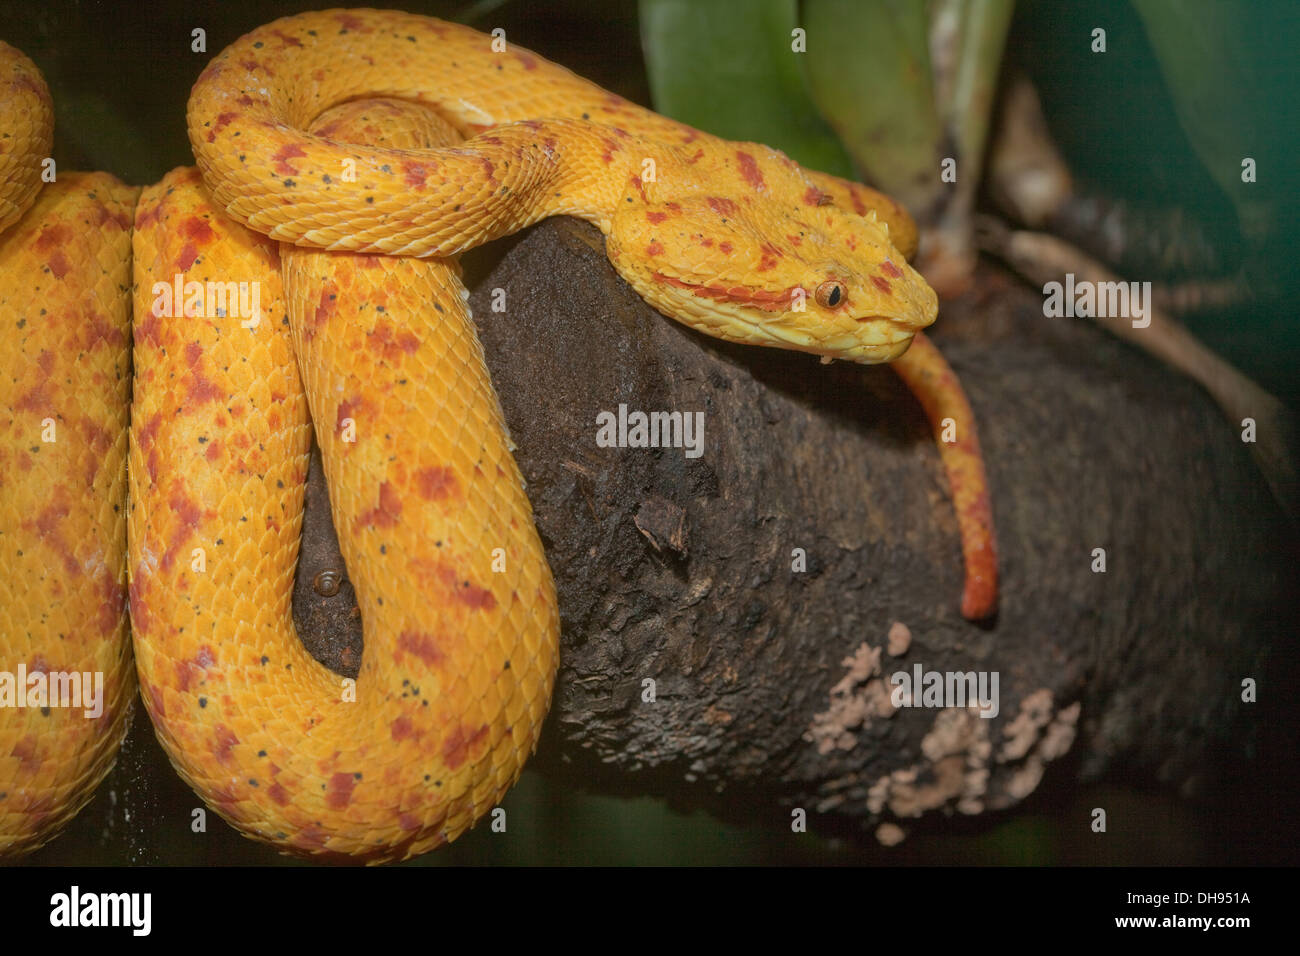 Eye-lash Viper (Bothriechis schegelii). Arboreal pit viper from Central and South America. Stock Photo